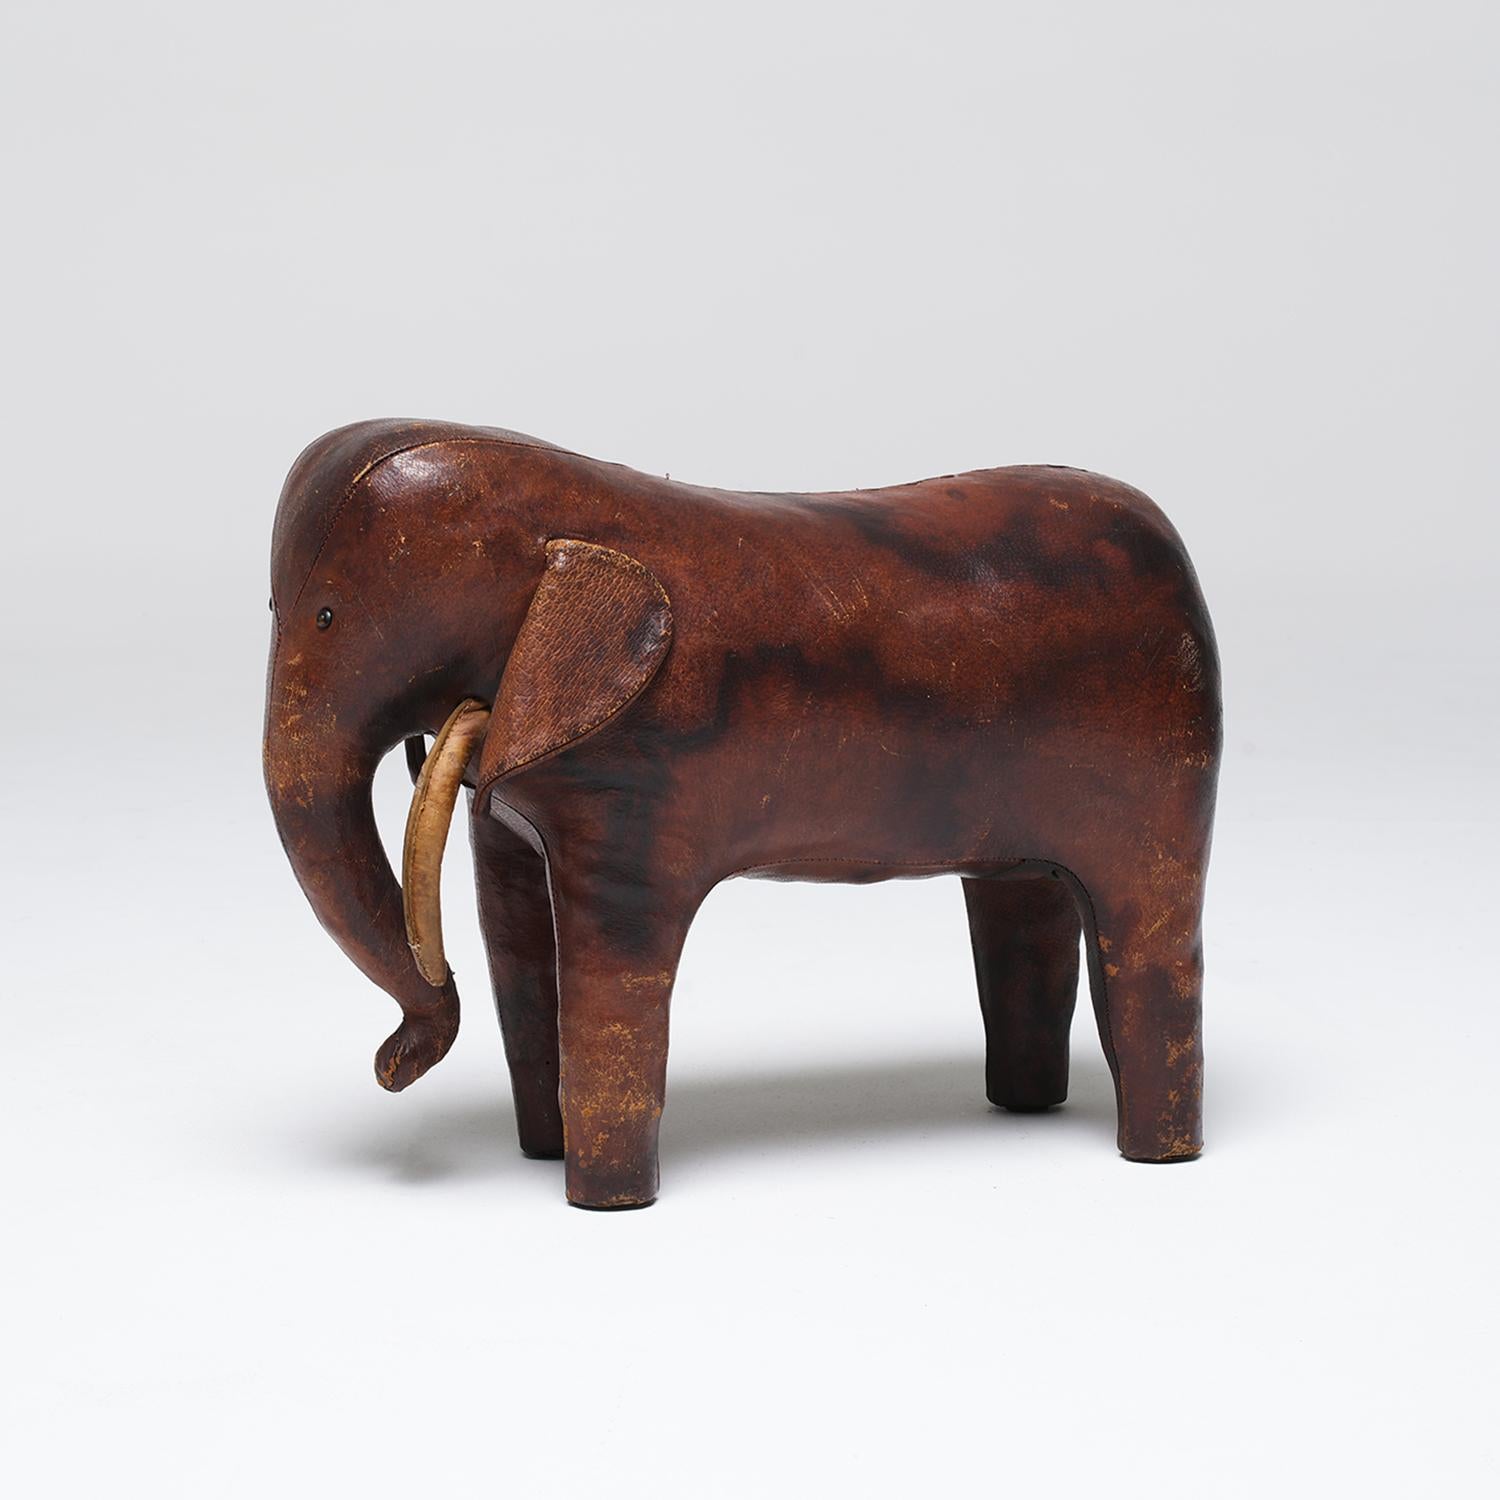 20th Century English Vintage Elephant Footstool by Dimitri Omersa In Good Condition For Sale In West Palm Beach, FL